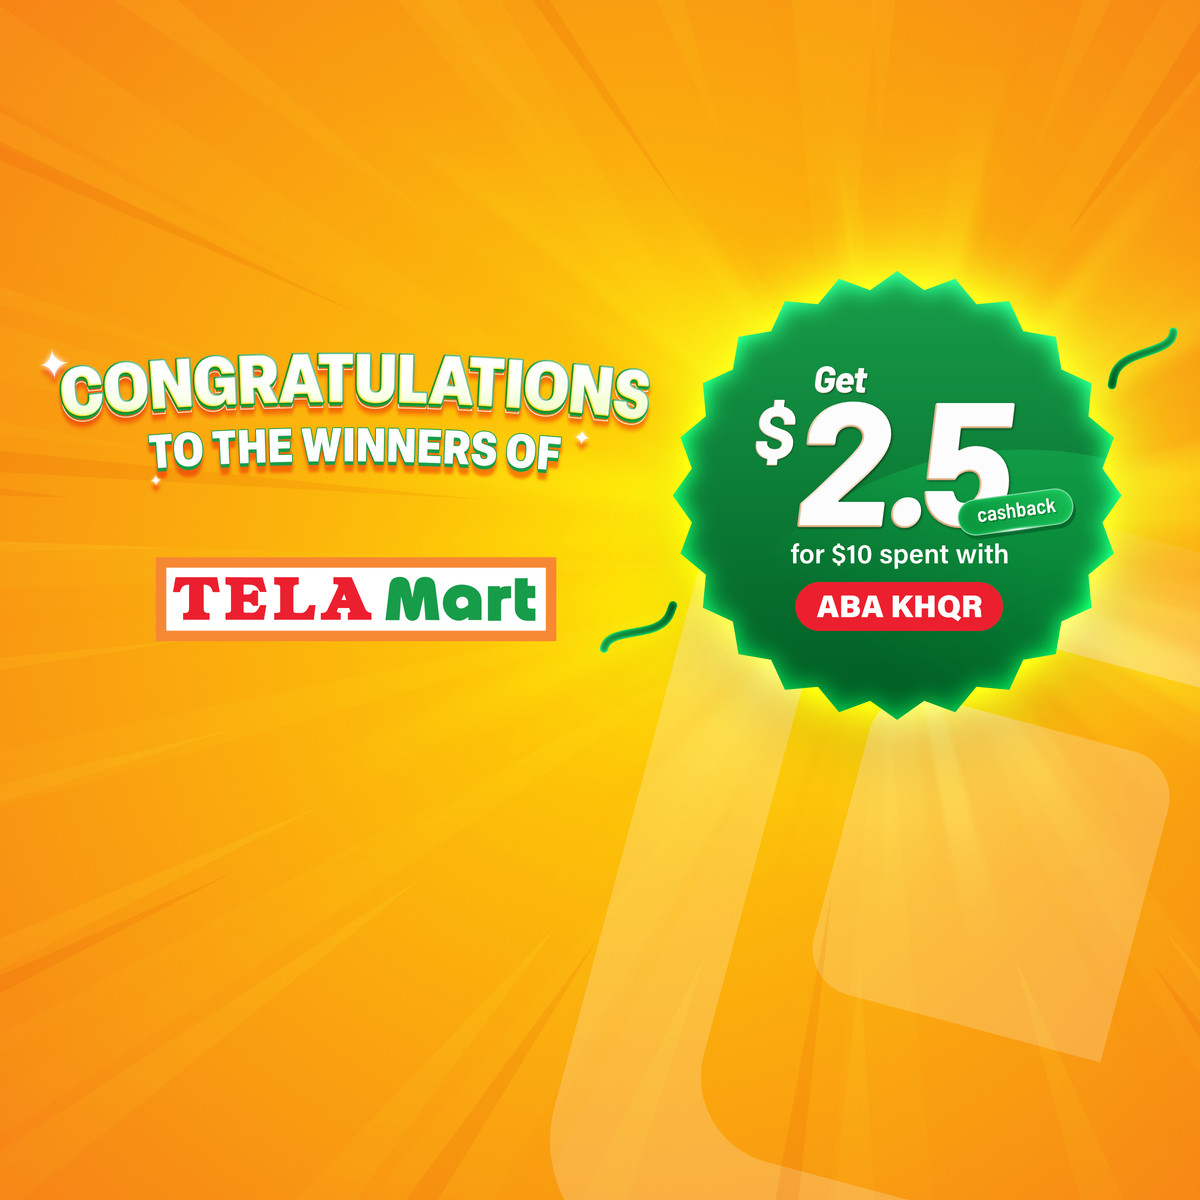 Congratulations to the winners of the “Get $2.5 cashback at Tela Mart with ABA KHQR”